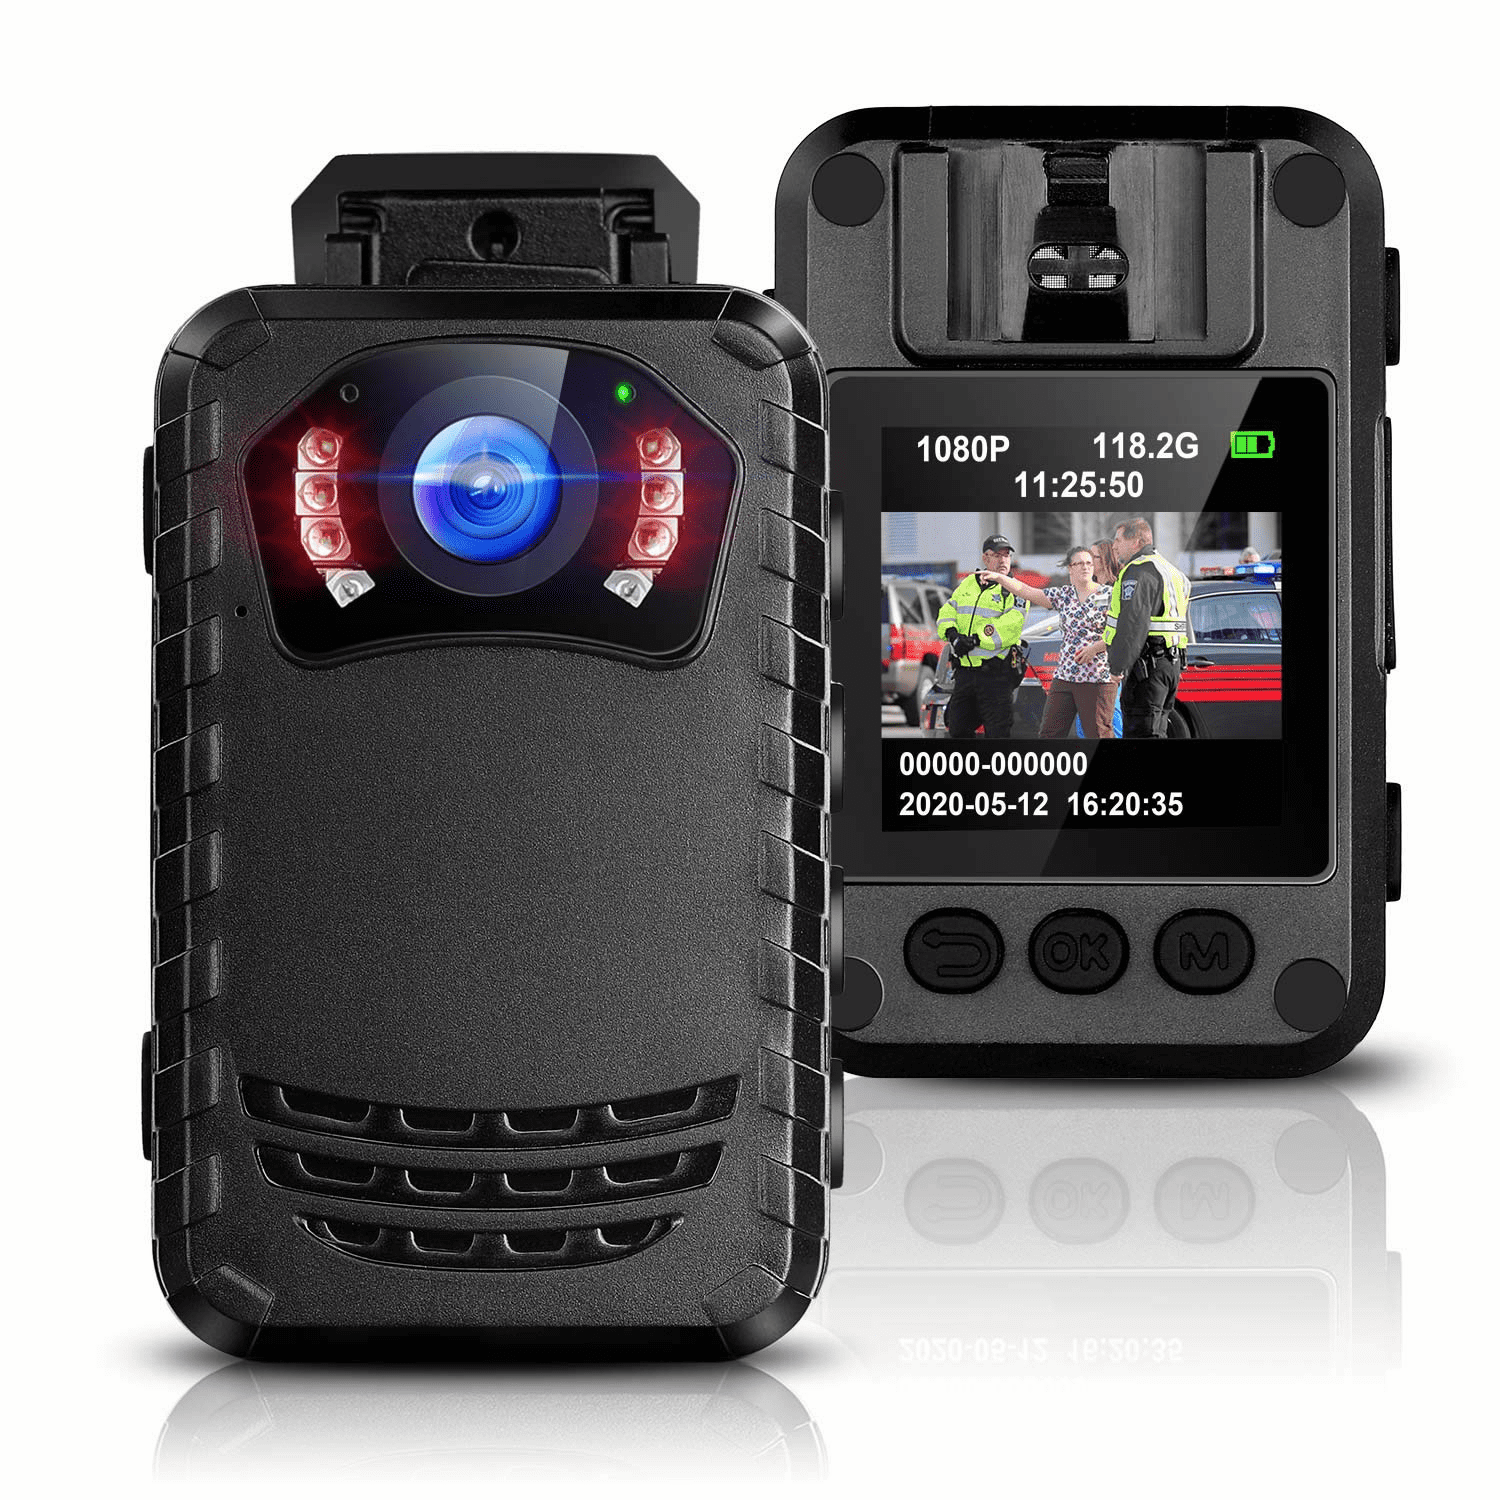 Body Camera Body Cam For Security Safety Protection 128GB 64GB